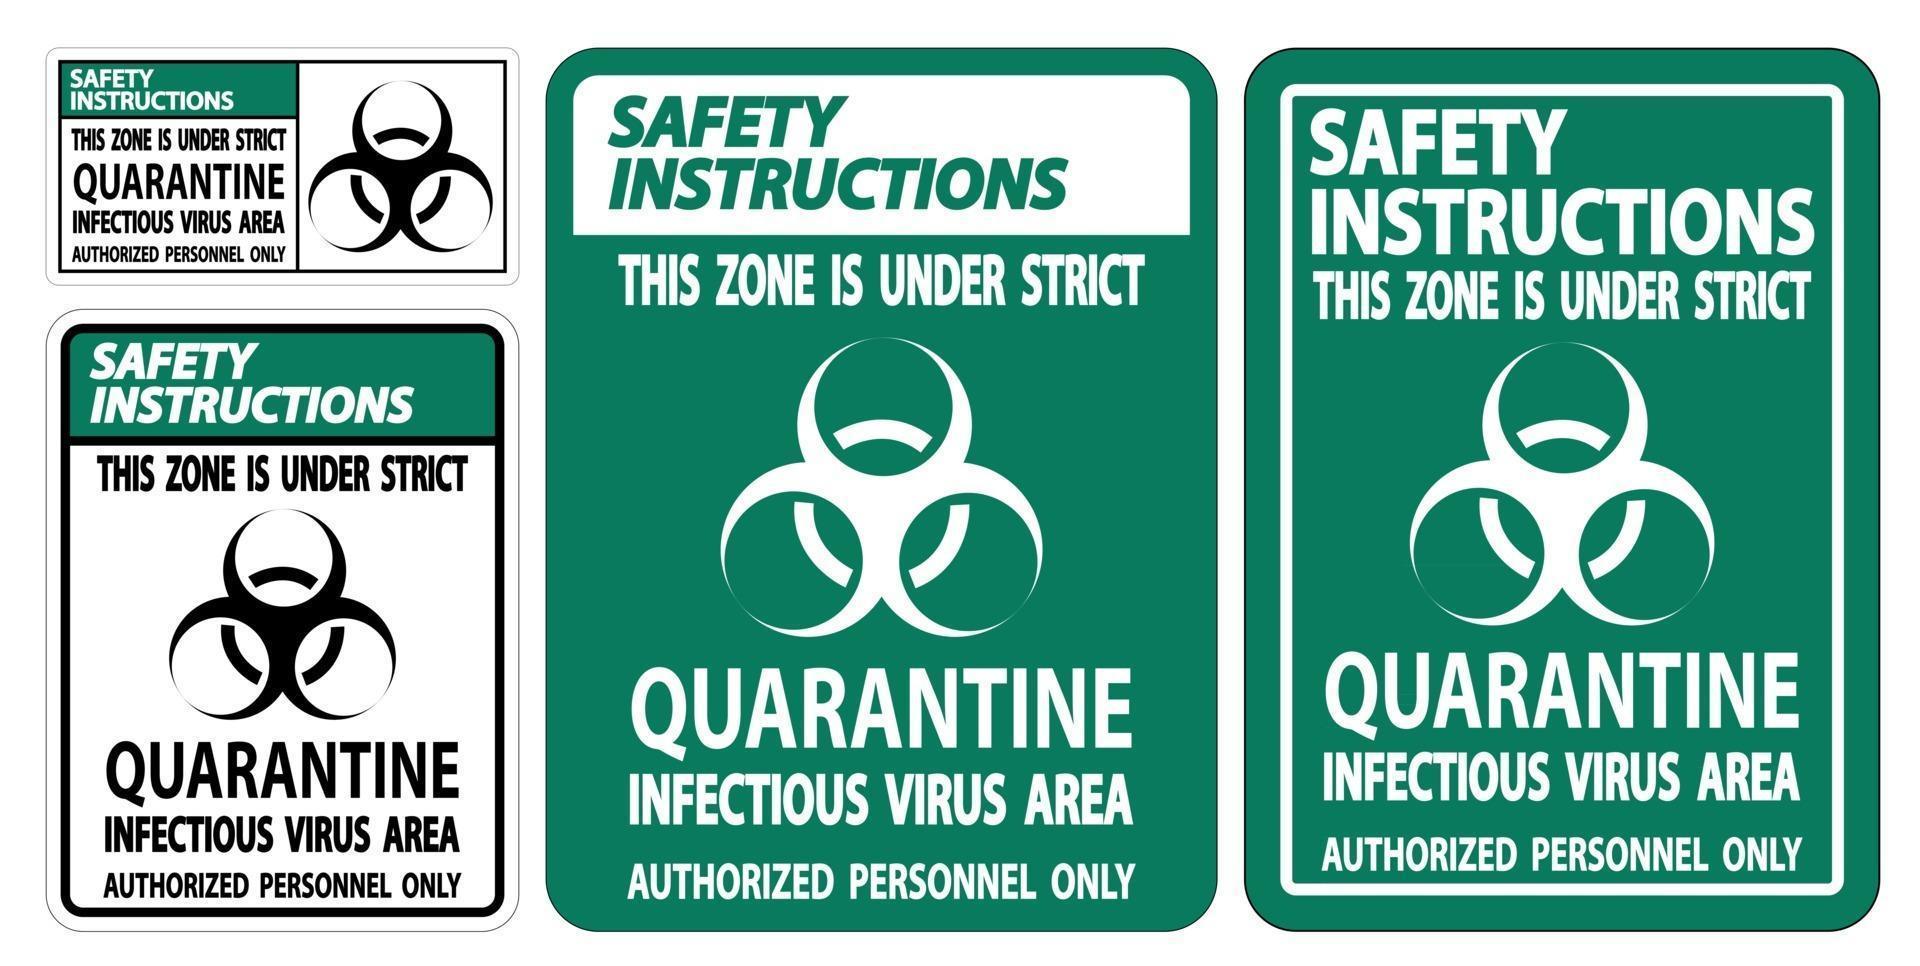 Safety Instructions Quarantine Infectious Virus Area Sign vector